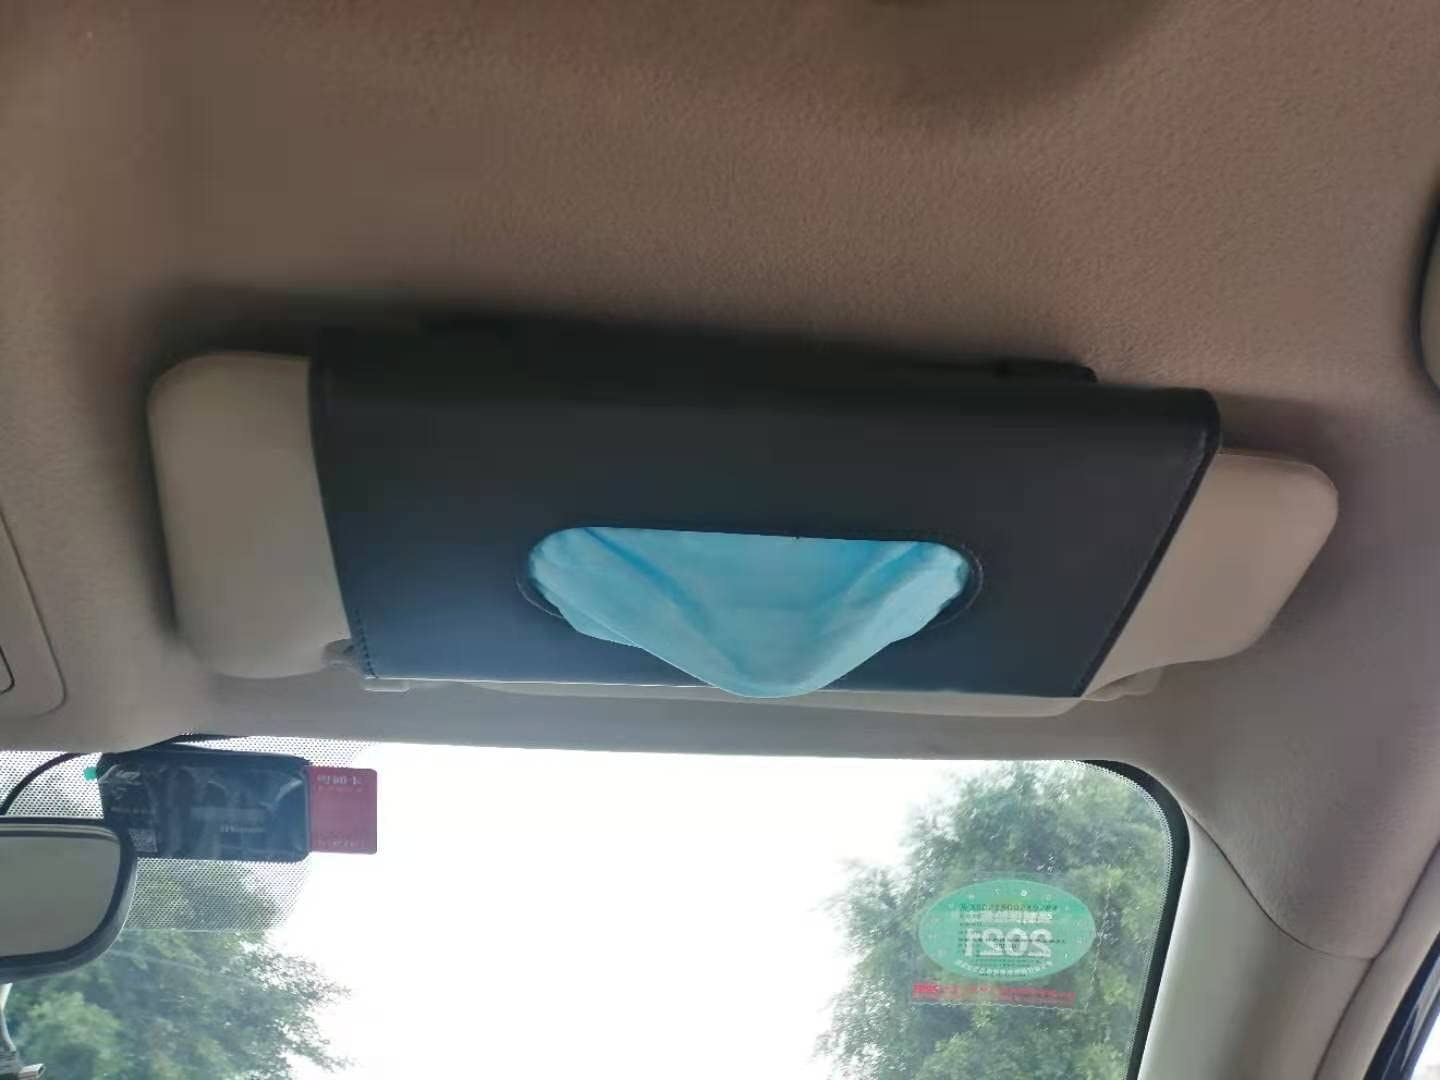 A leather tissue holder clipped to a car sun visor